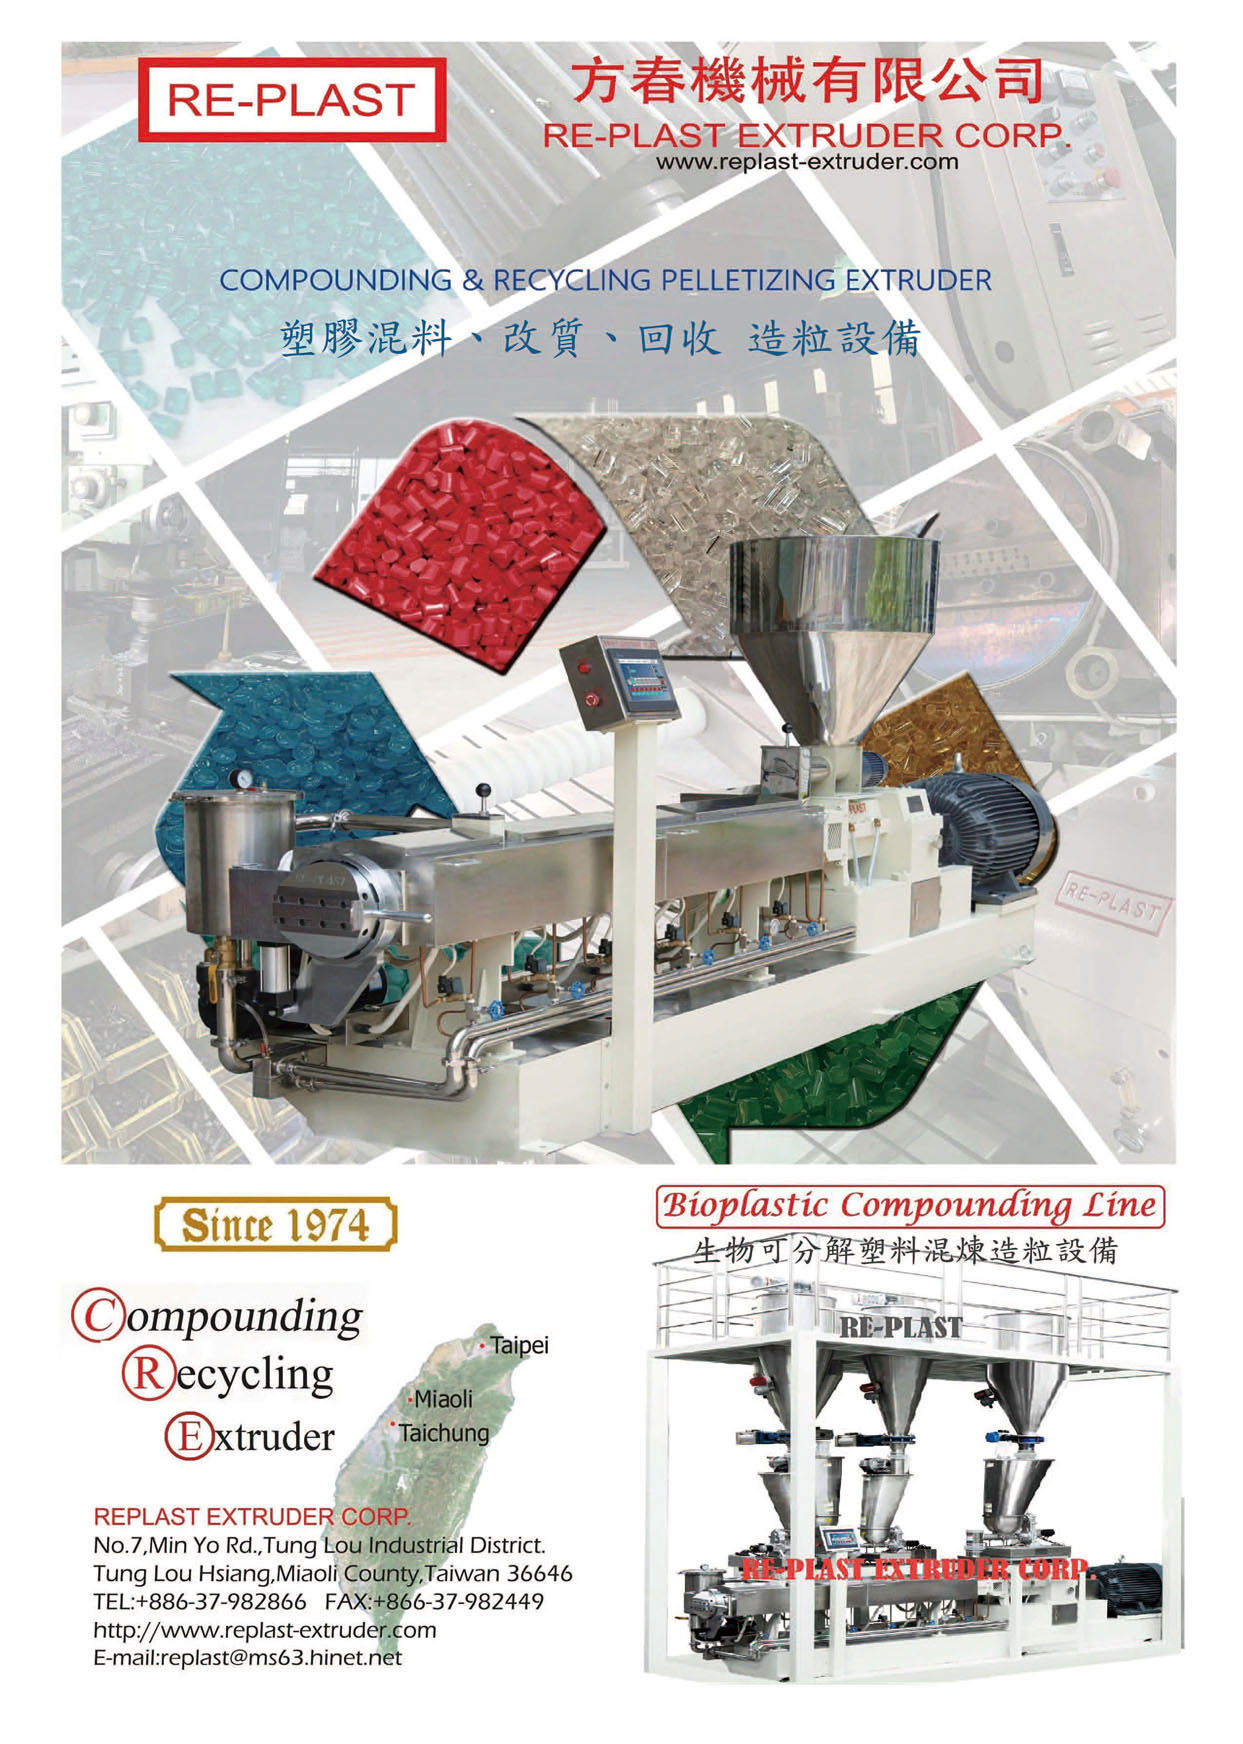 Who Makes Machinery in Taiwan RE-PLAST EXTRUDER CORP.